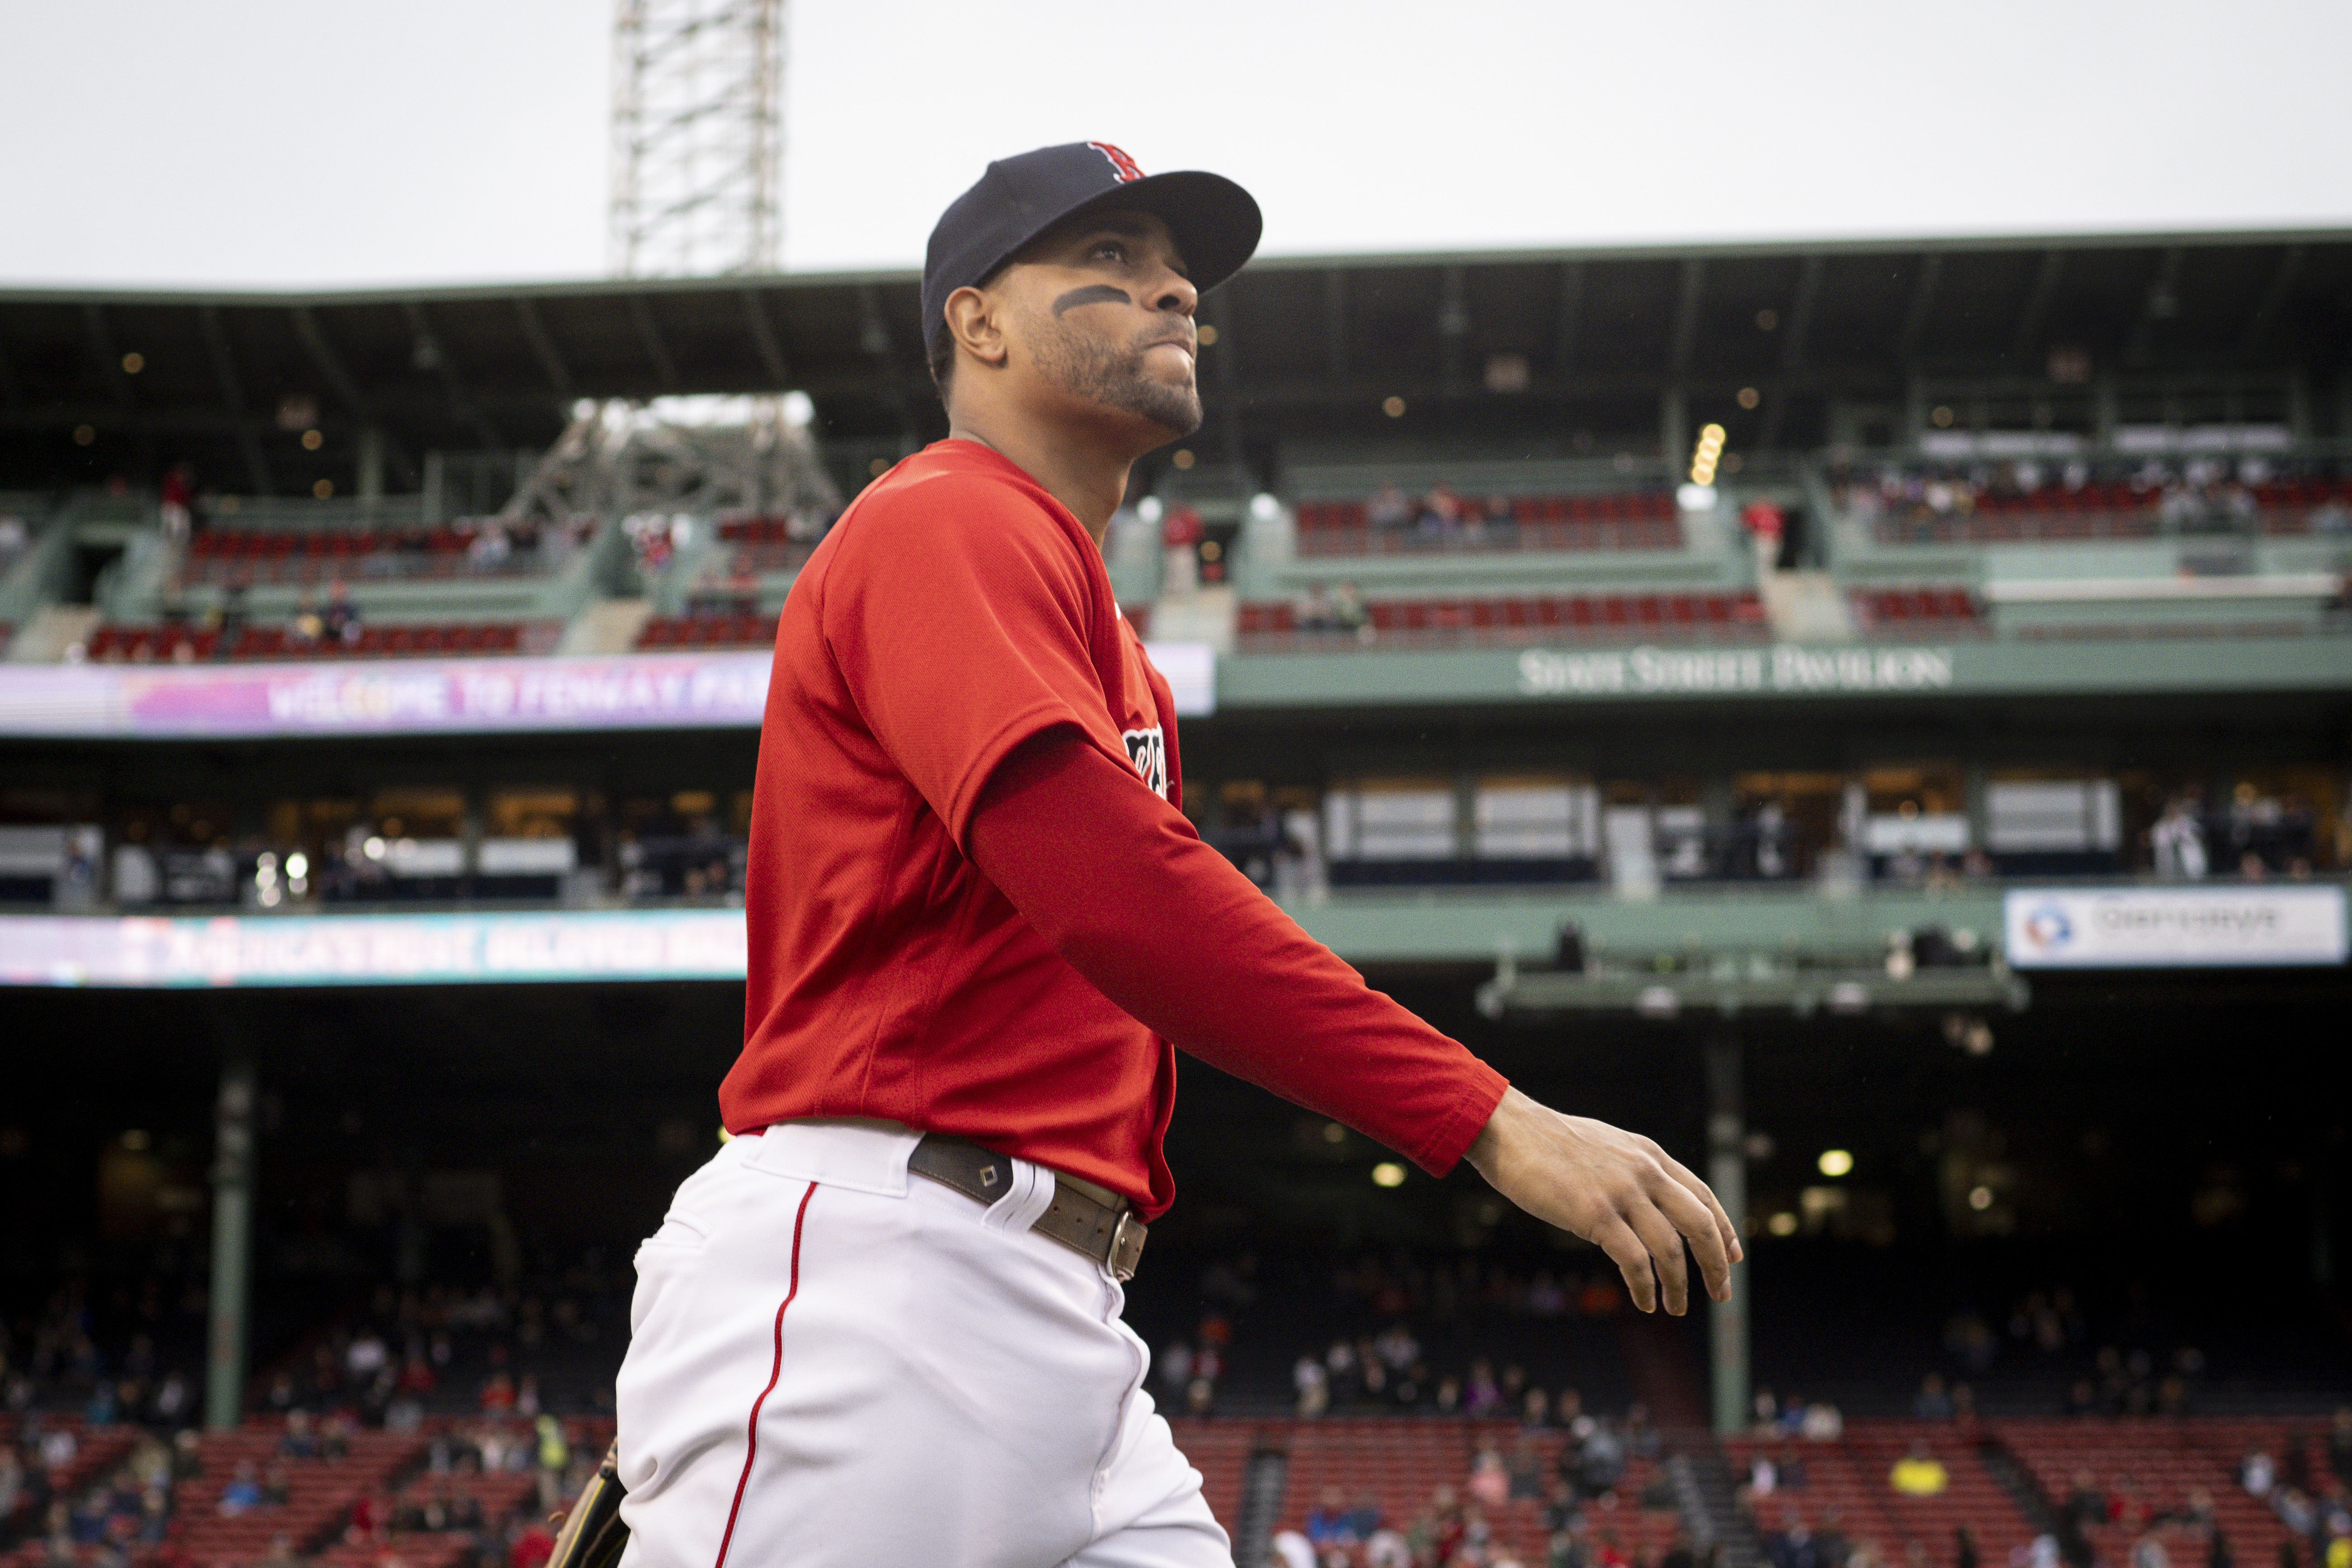 Xander Bogaerts Looks Like All-Star in Leading Red Sox to Win